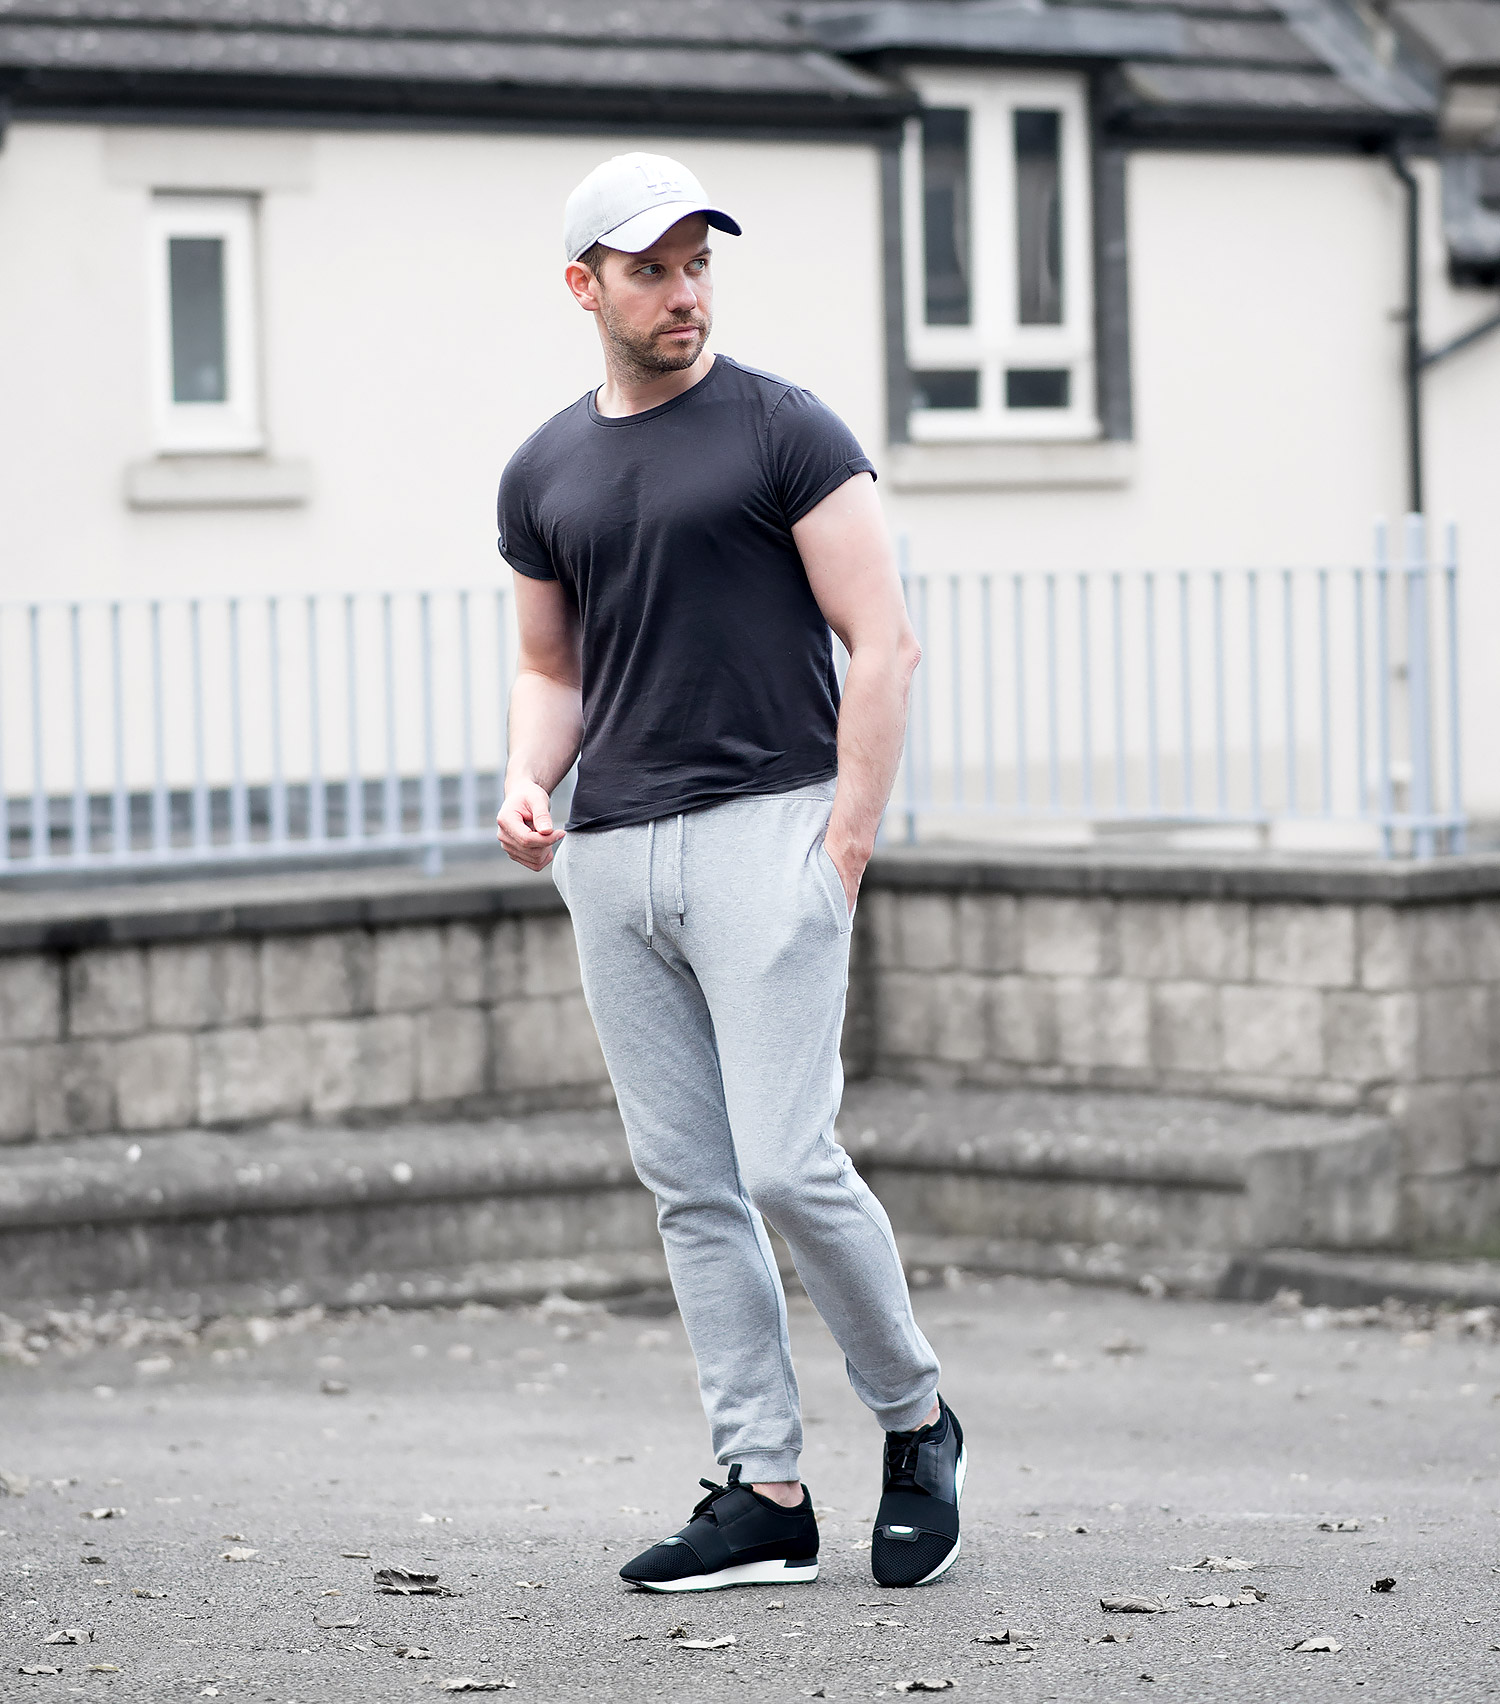 Topman Joggers And Balenciaga Race Runners Outfit - Your Average Guy